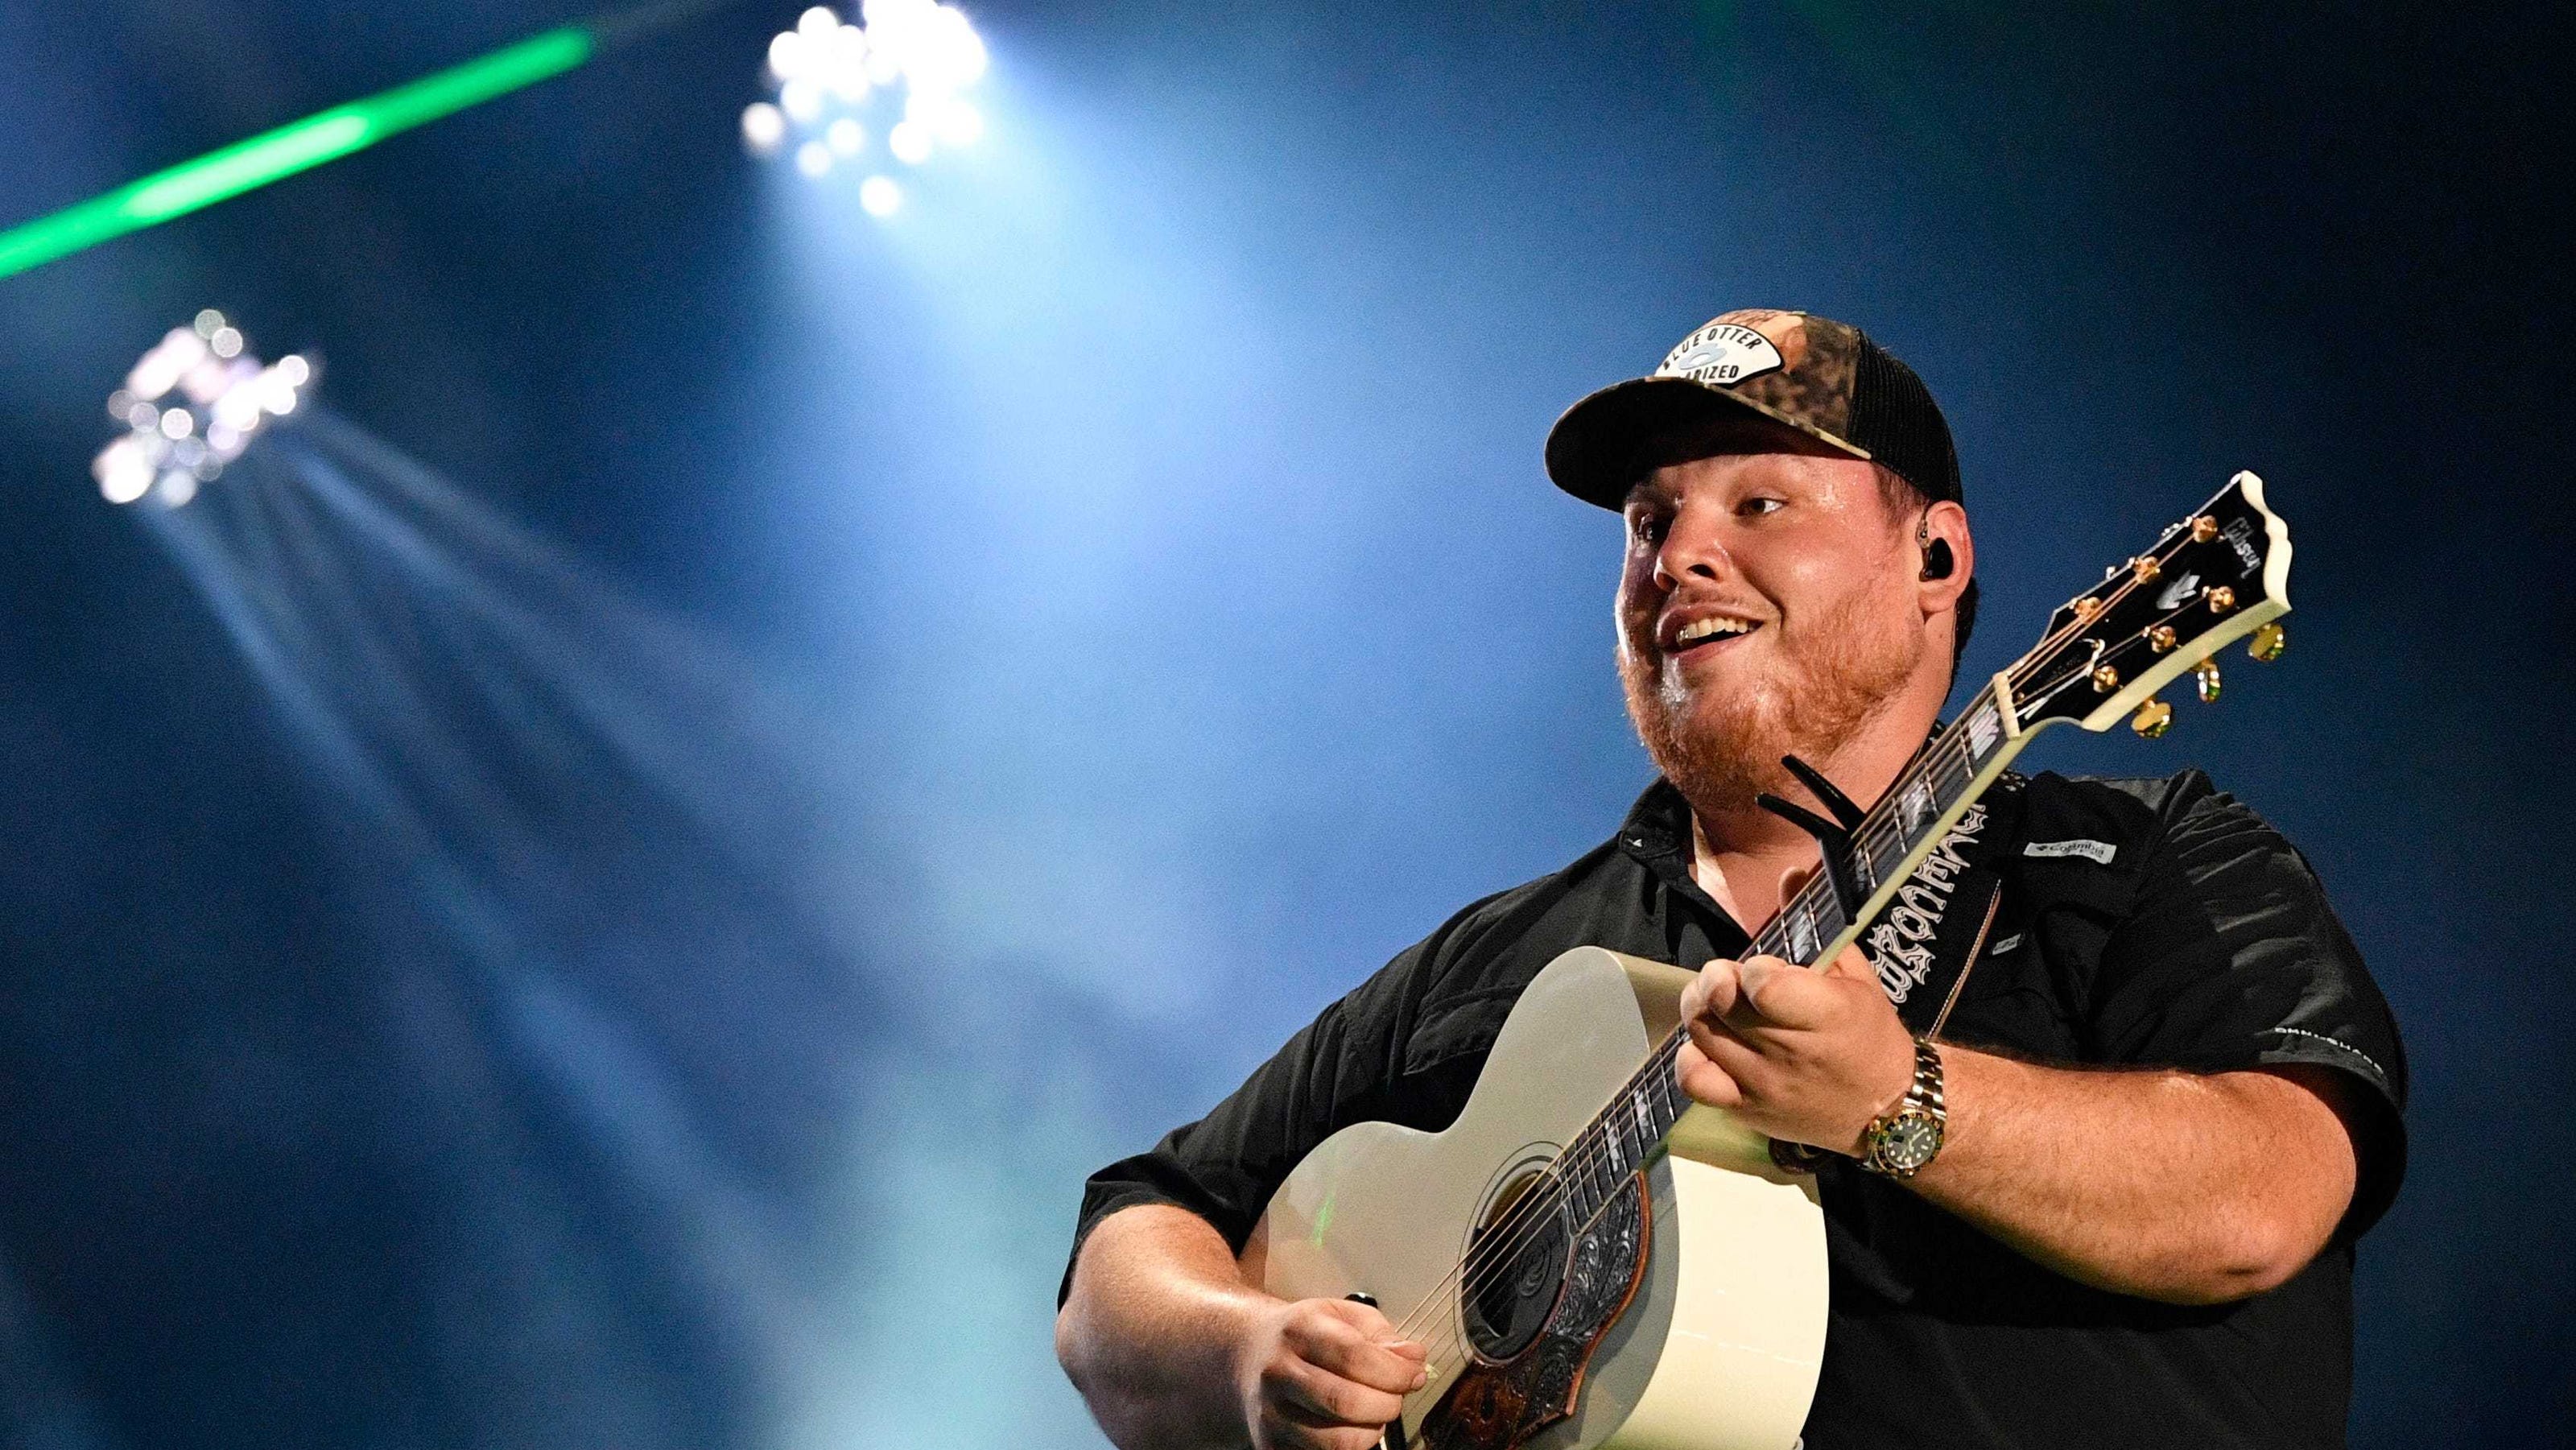 Luke Combs on ACM Awards sings 'Better Together' at Bluebird Cafe